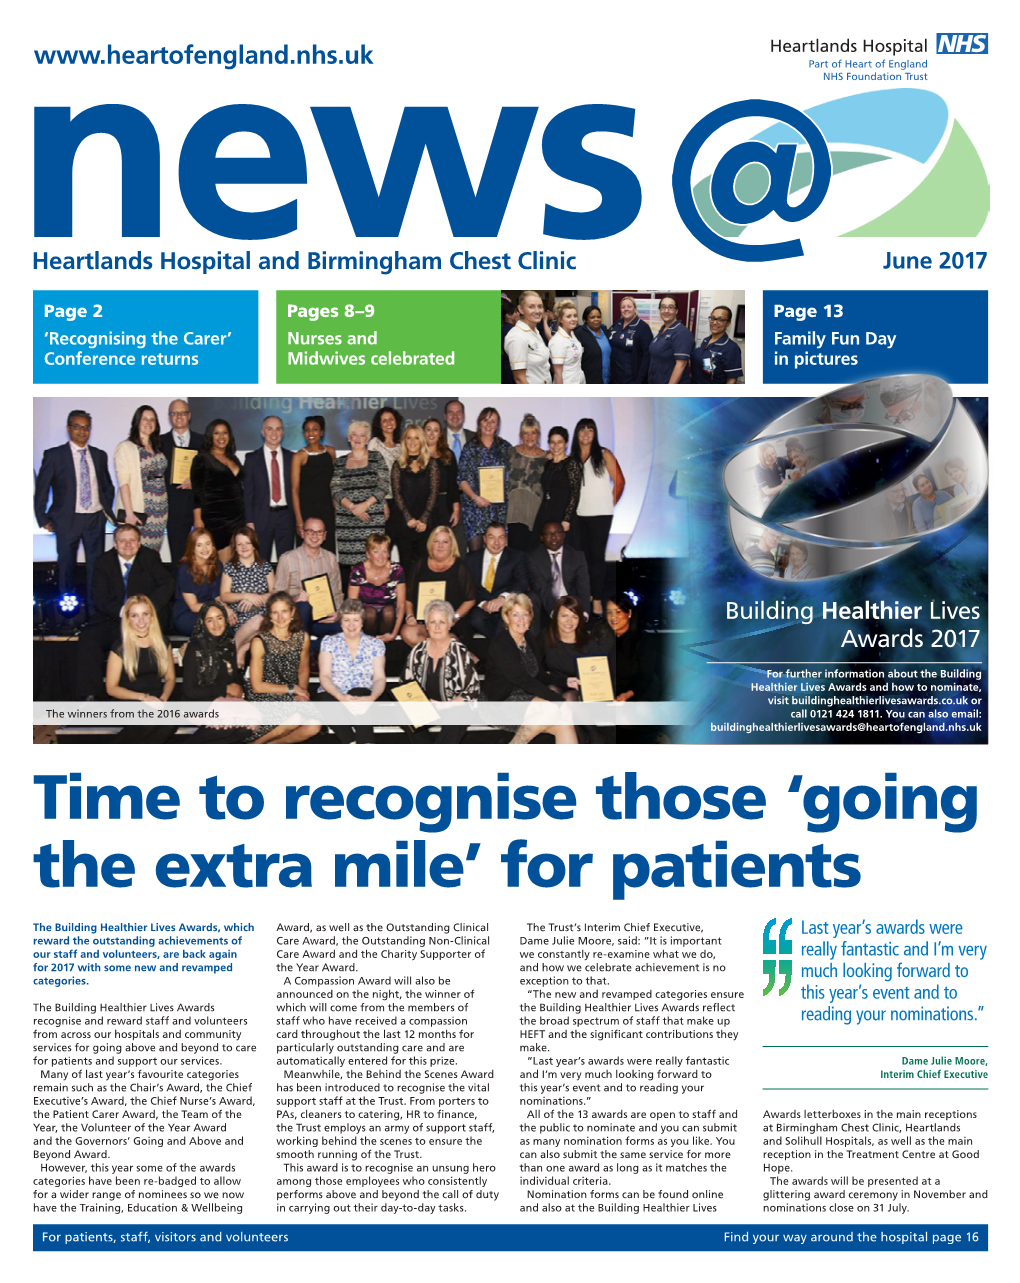 Time to Recognise Those 'Going the Extra Mile' for Patients